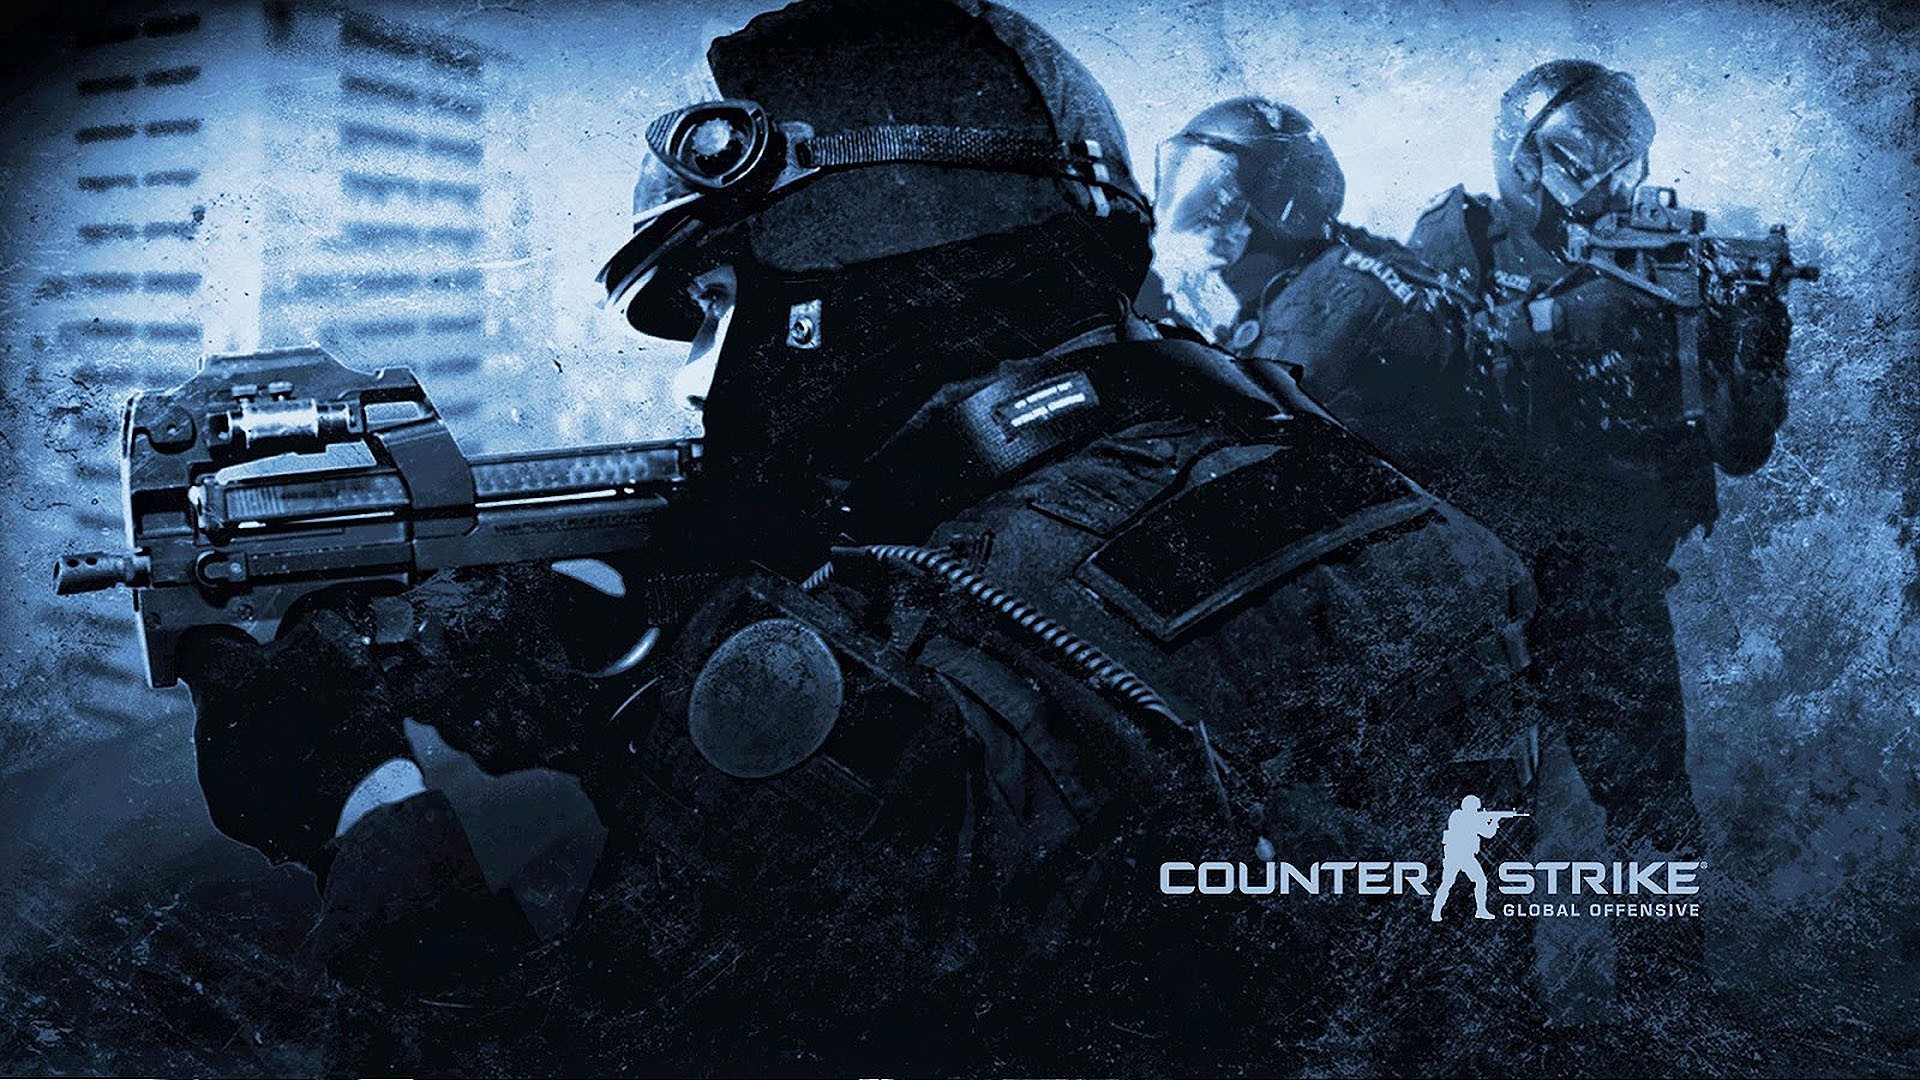 Counter-Strike: Global Offensive marketing image